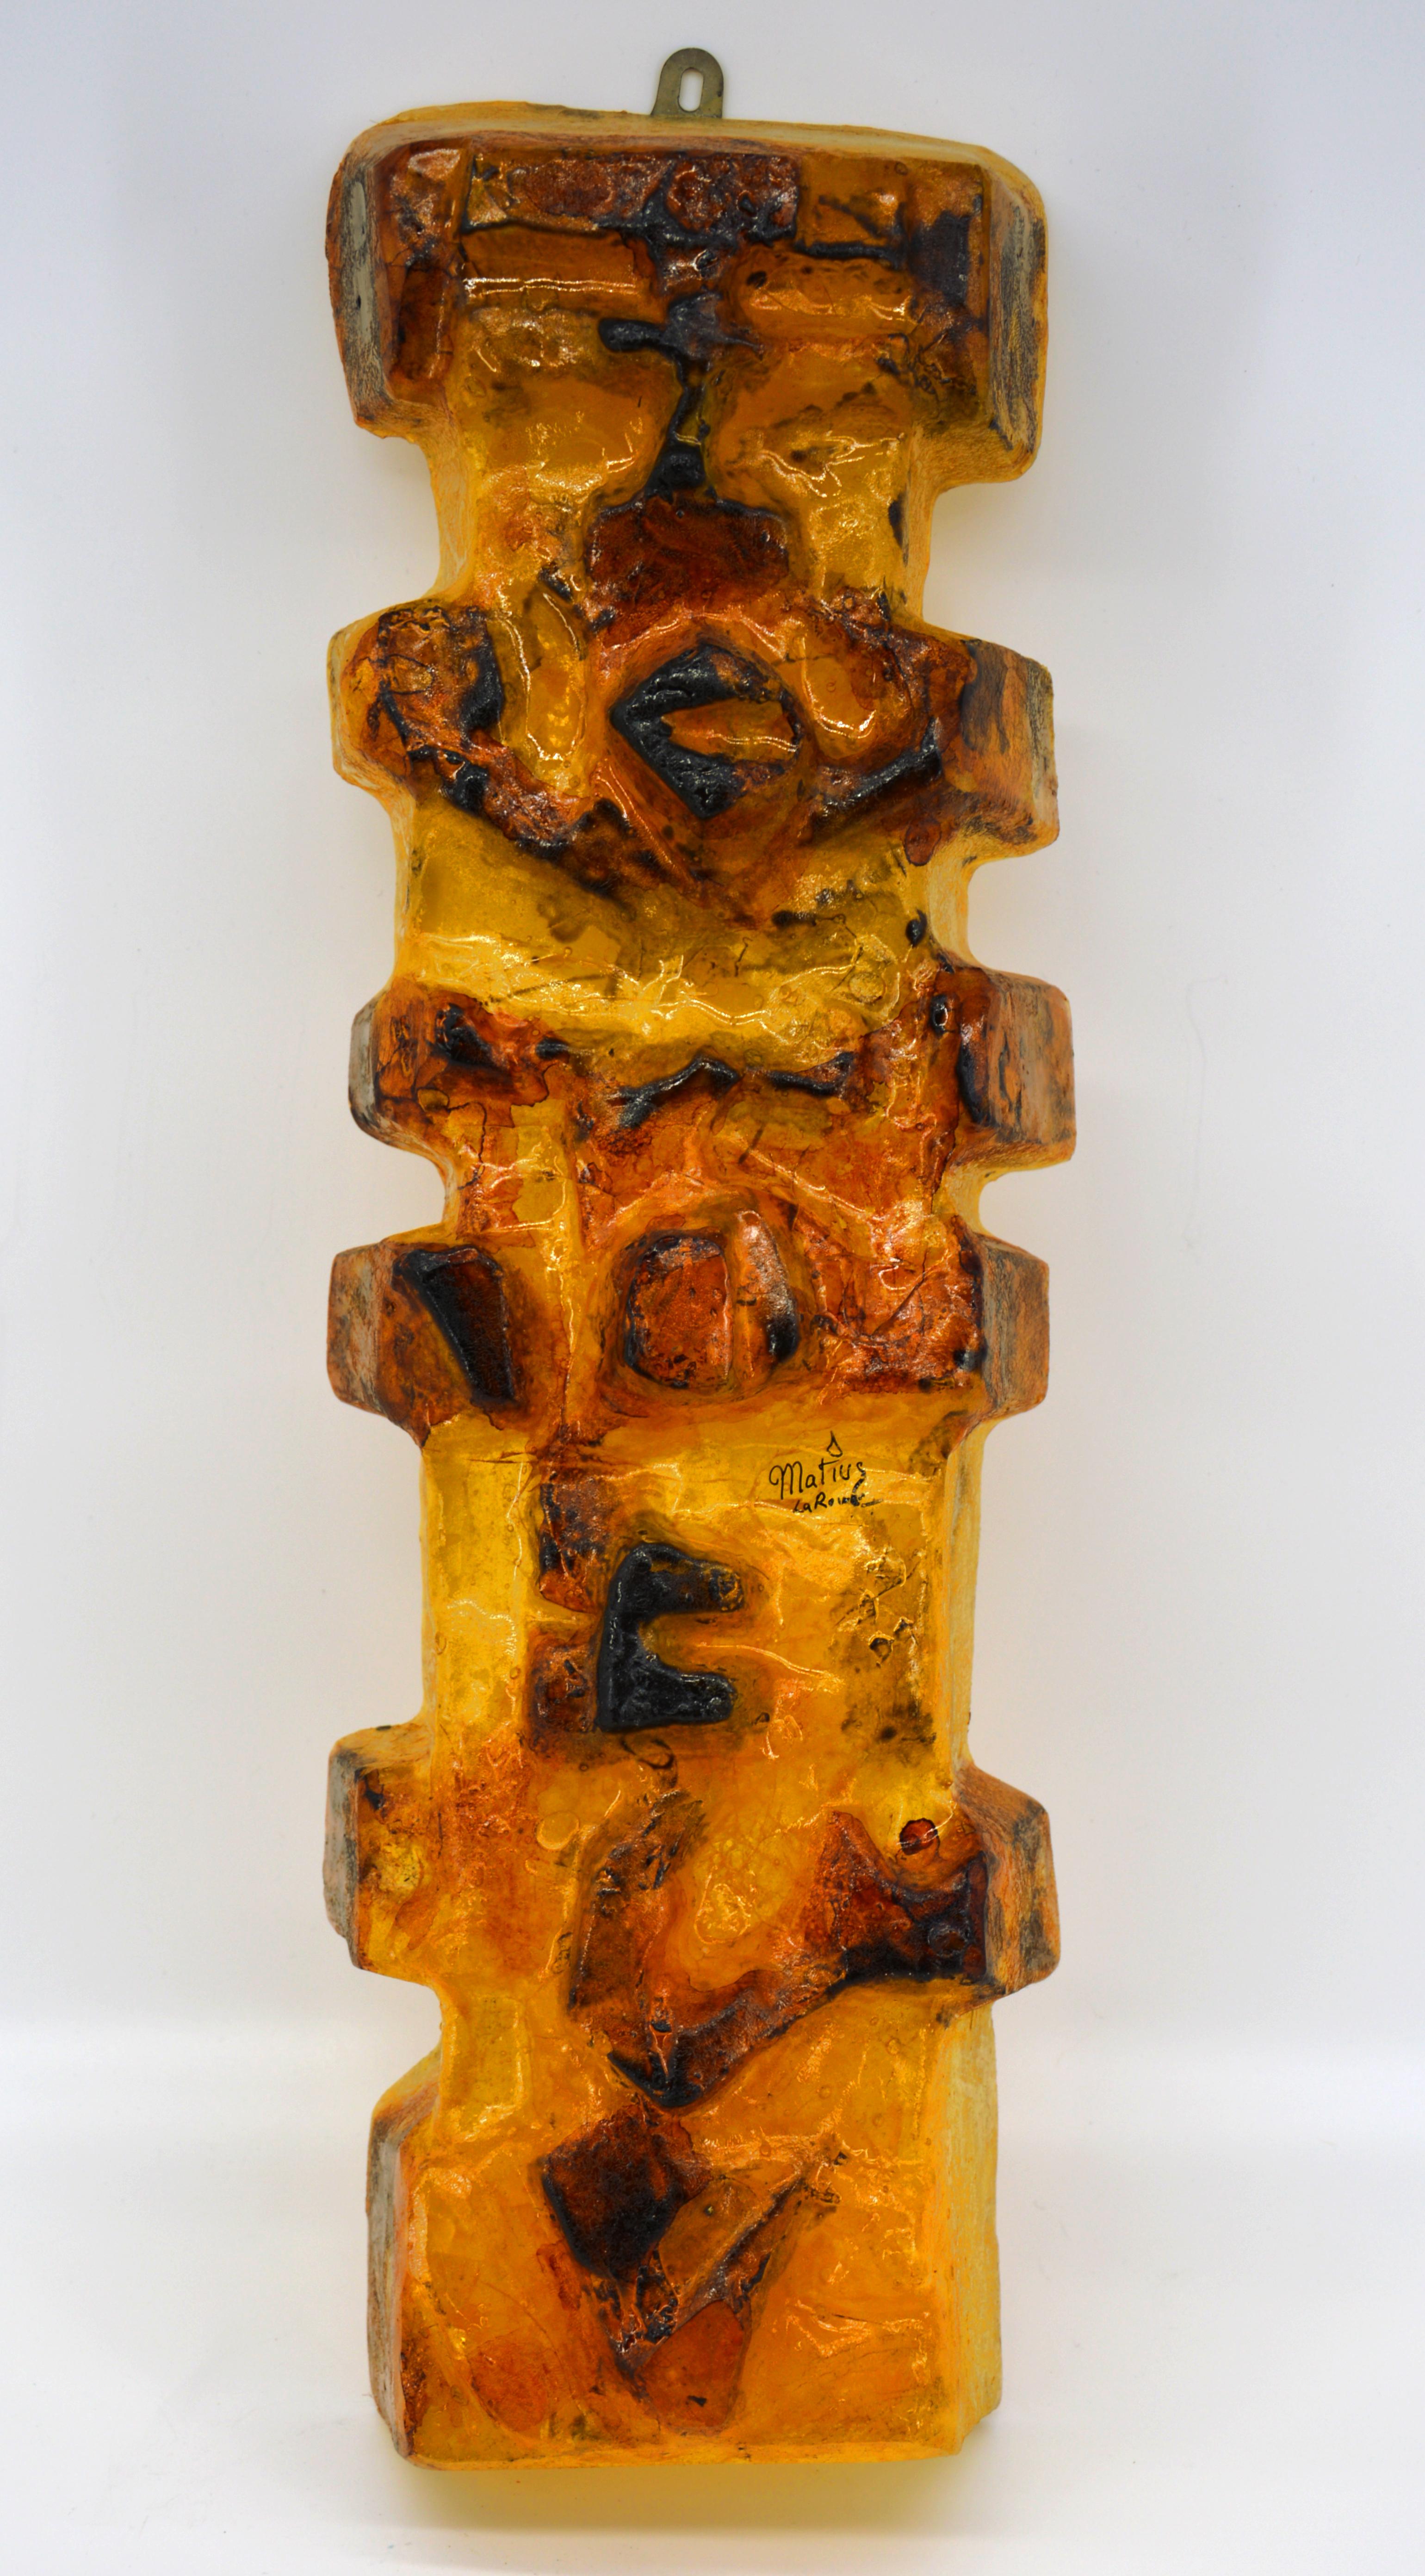 Pop Art Totem sculpture by Matius (La Roue, Haute-Provence), France, 1970s. The most often uses as a wall sconce. Fractal resin. Measurement: 57 x 18.3 x 9 cm (22.4 x 7.2 x 3.5 inches). Signed (see photo).